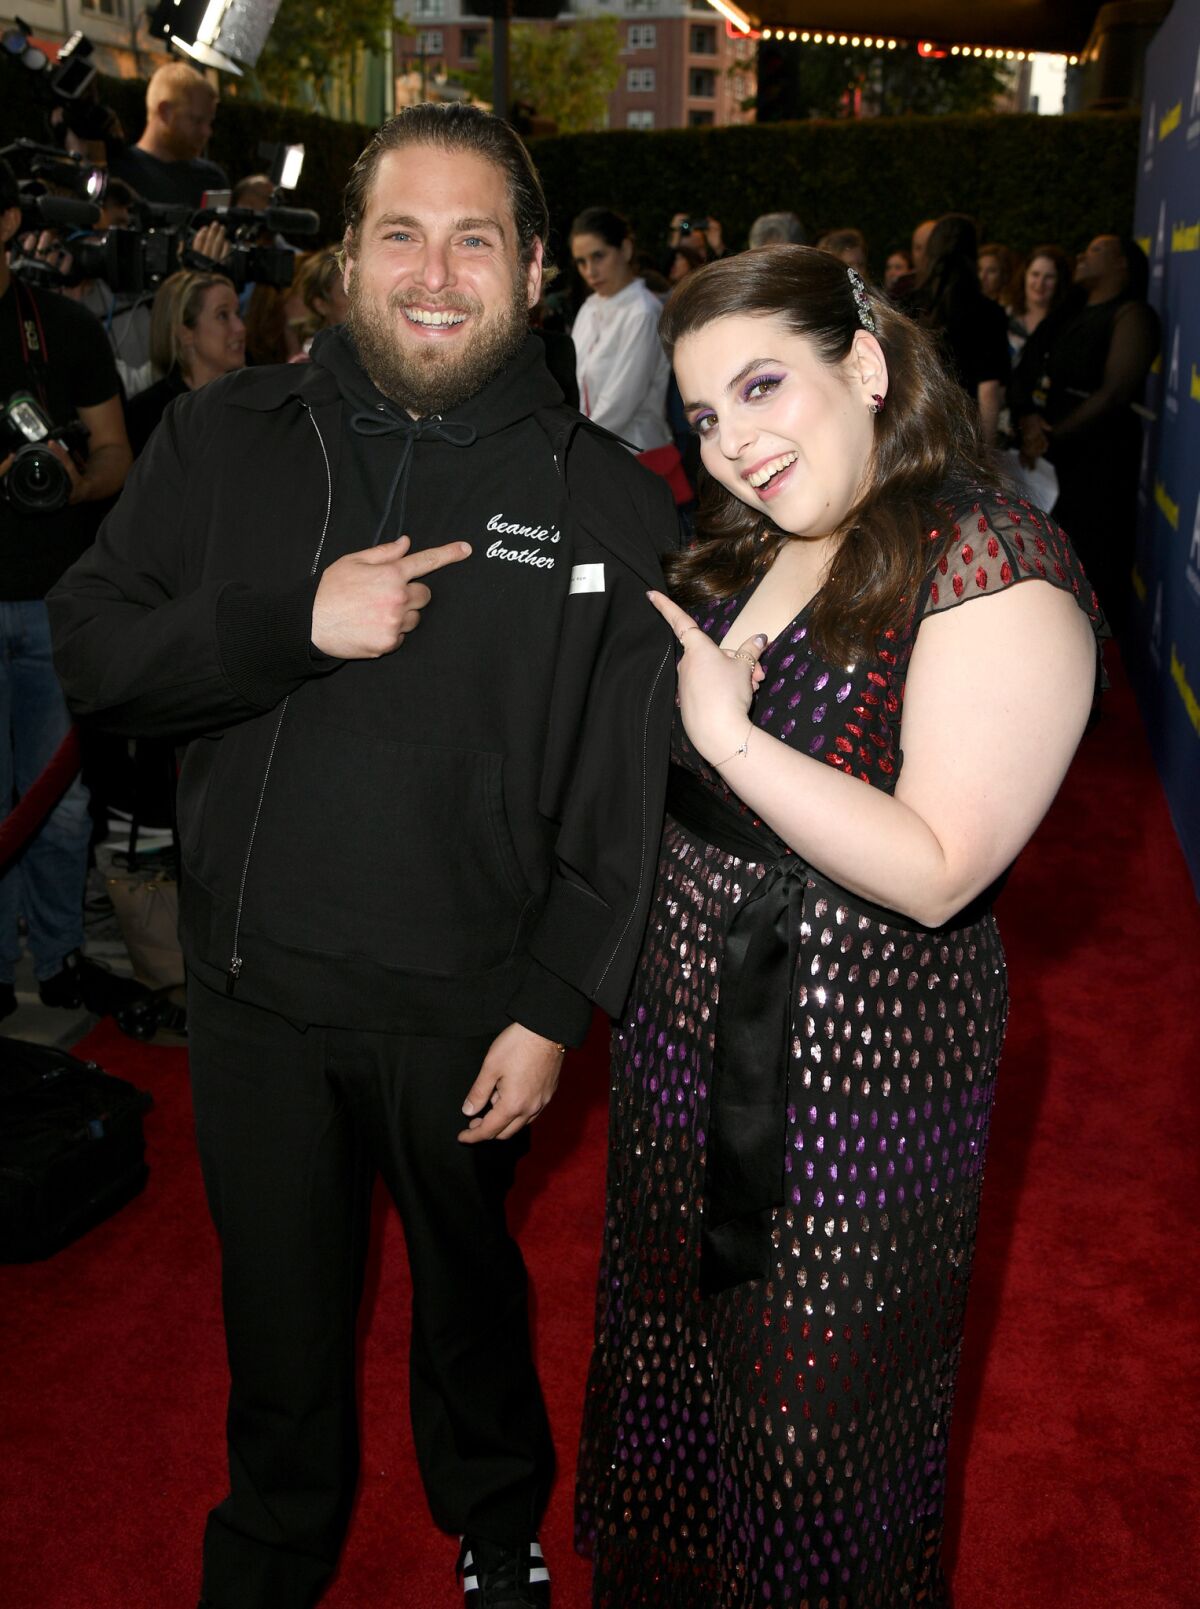 Siblings Jonah Hill, left, and Beanie Feldstein at the LA special screening of "Booksmart" at the Theatre at Ace Hotel on May 13.